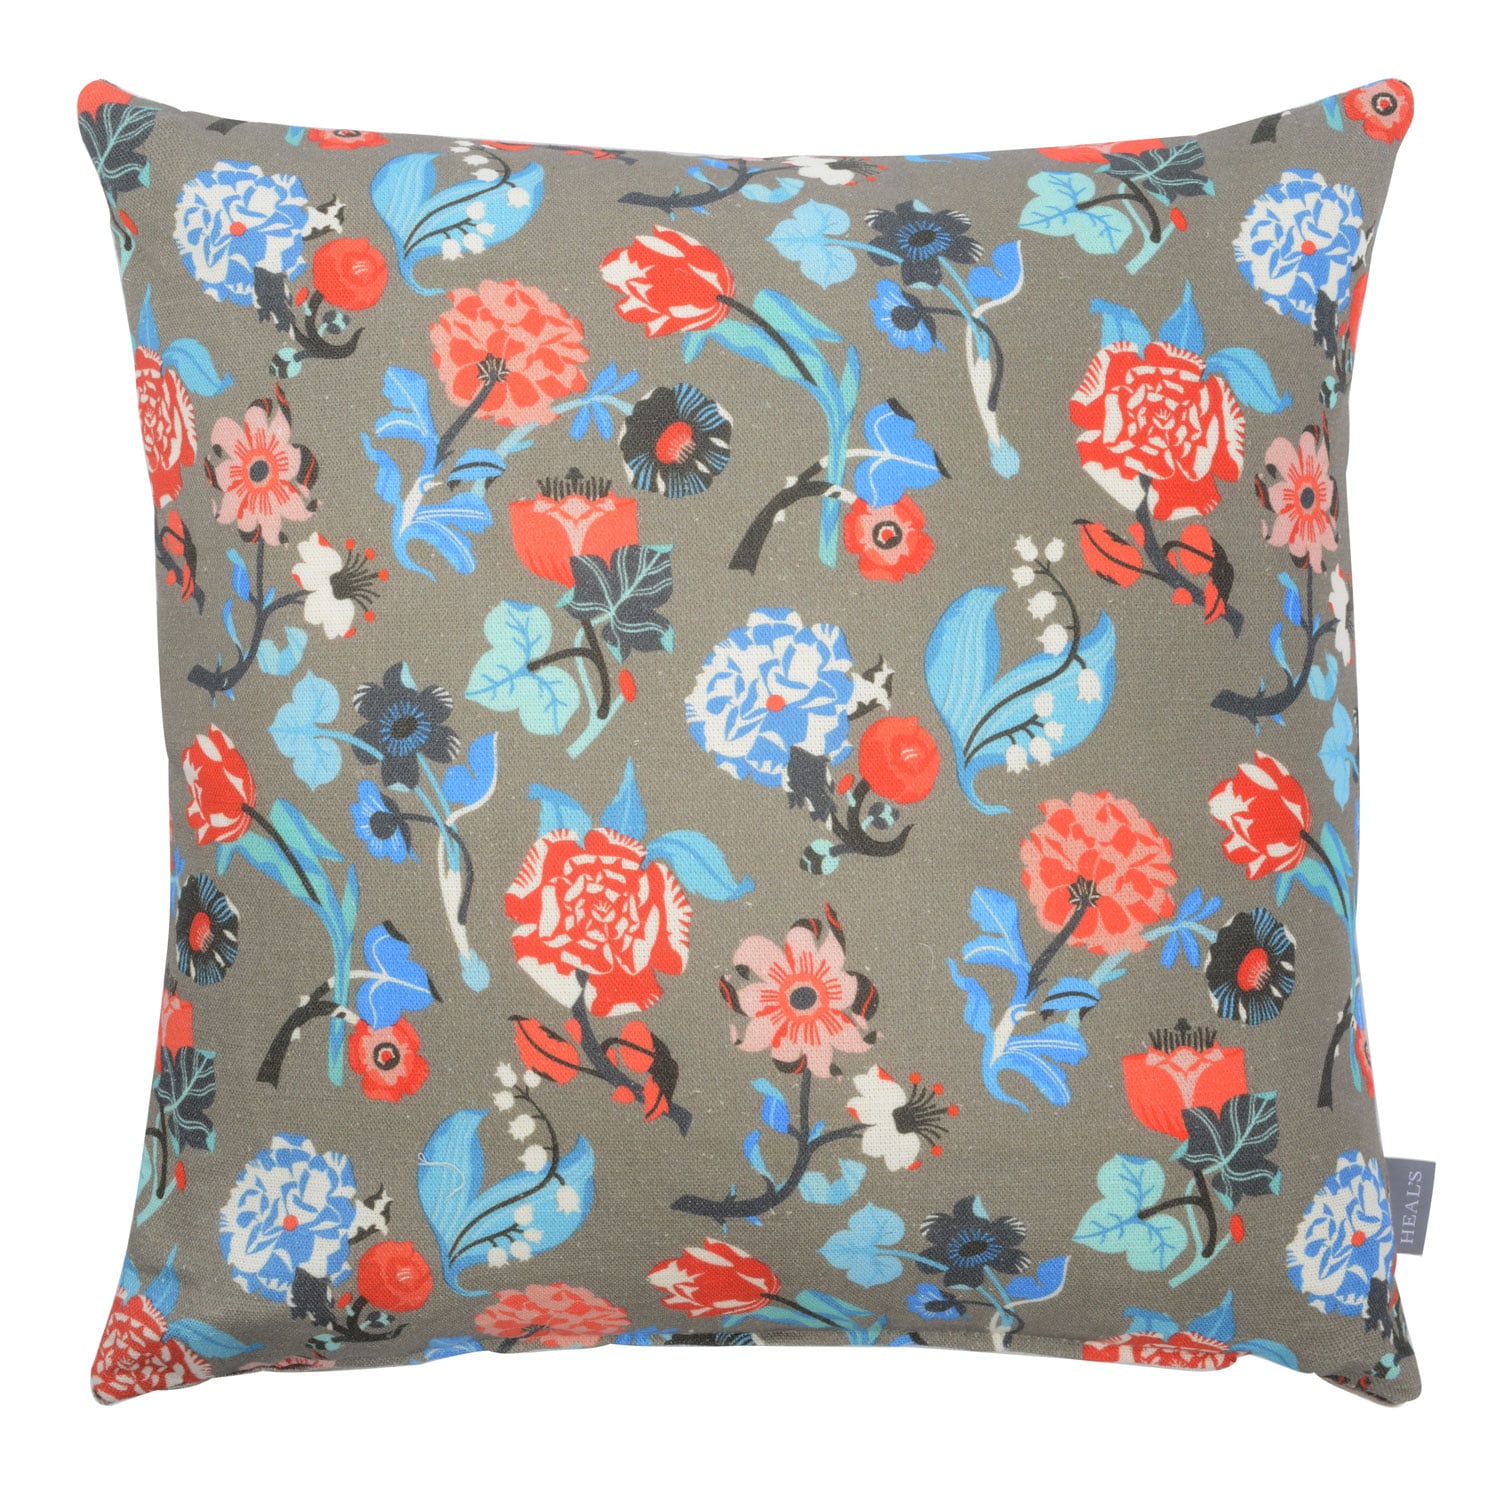 Heal's 1810 Cushion in Lady Jane by Petra Borner May Design Series